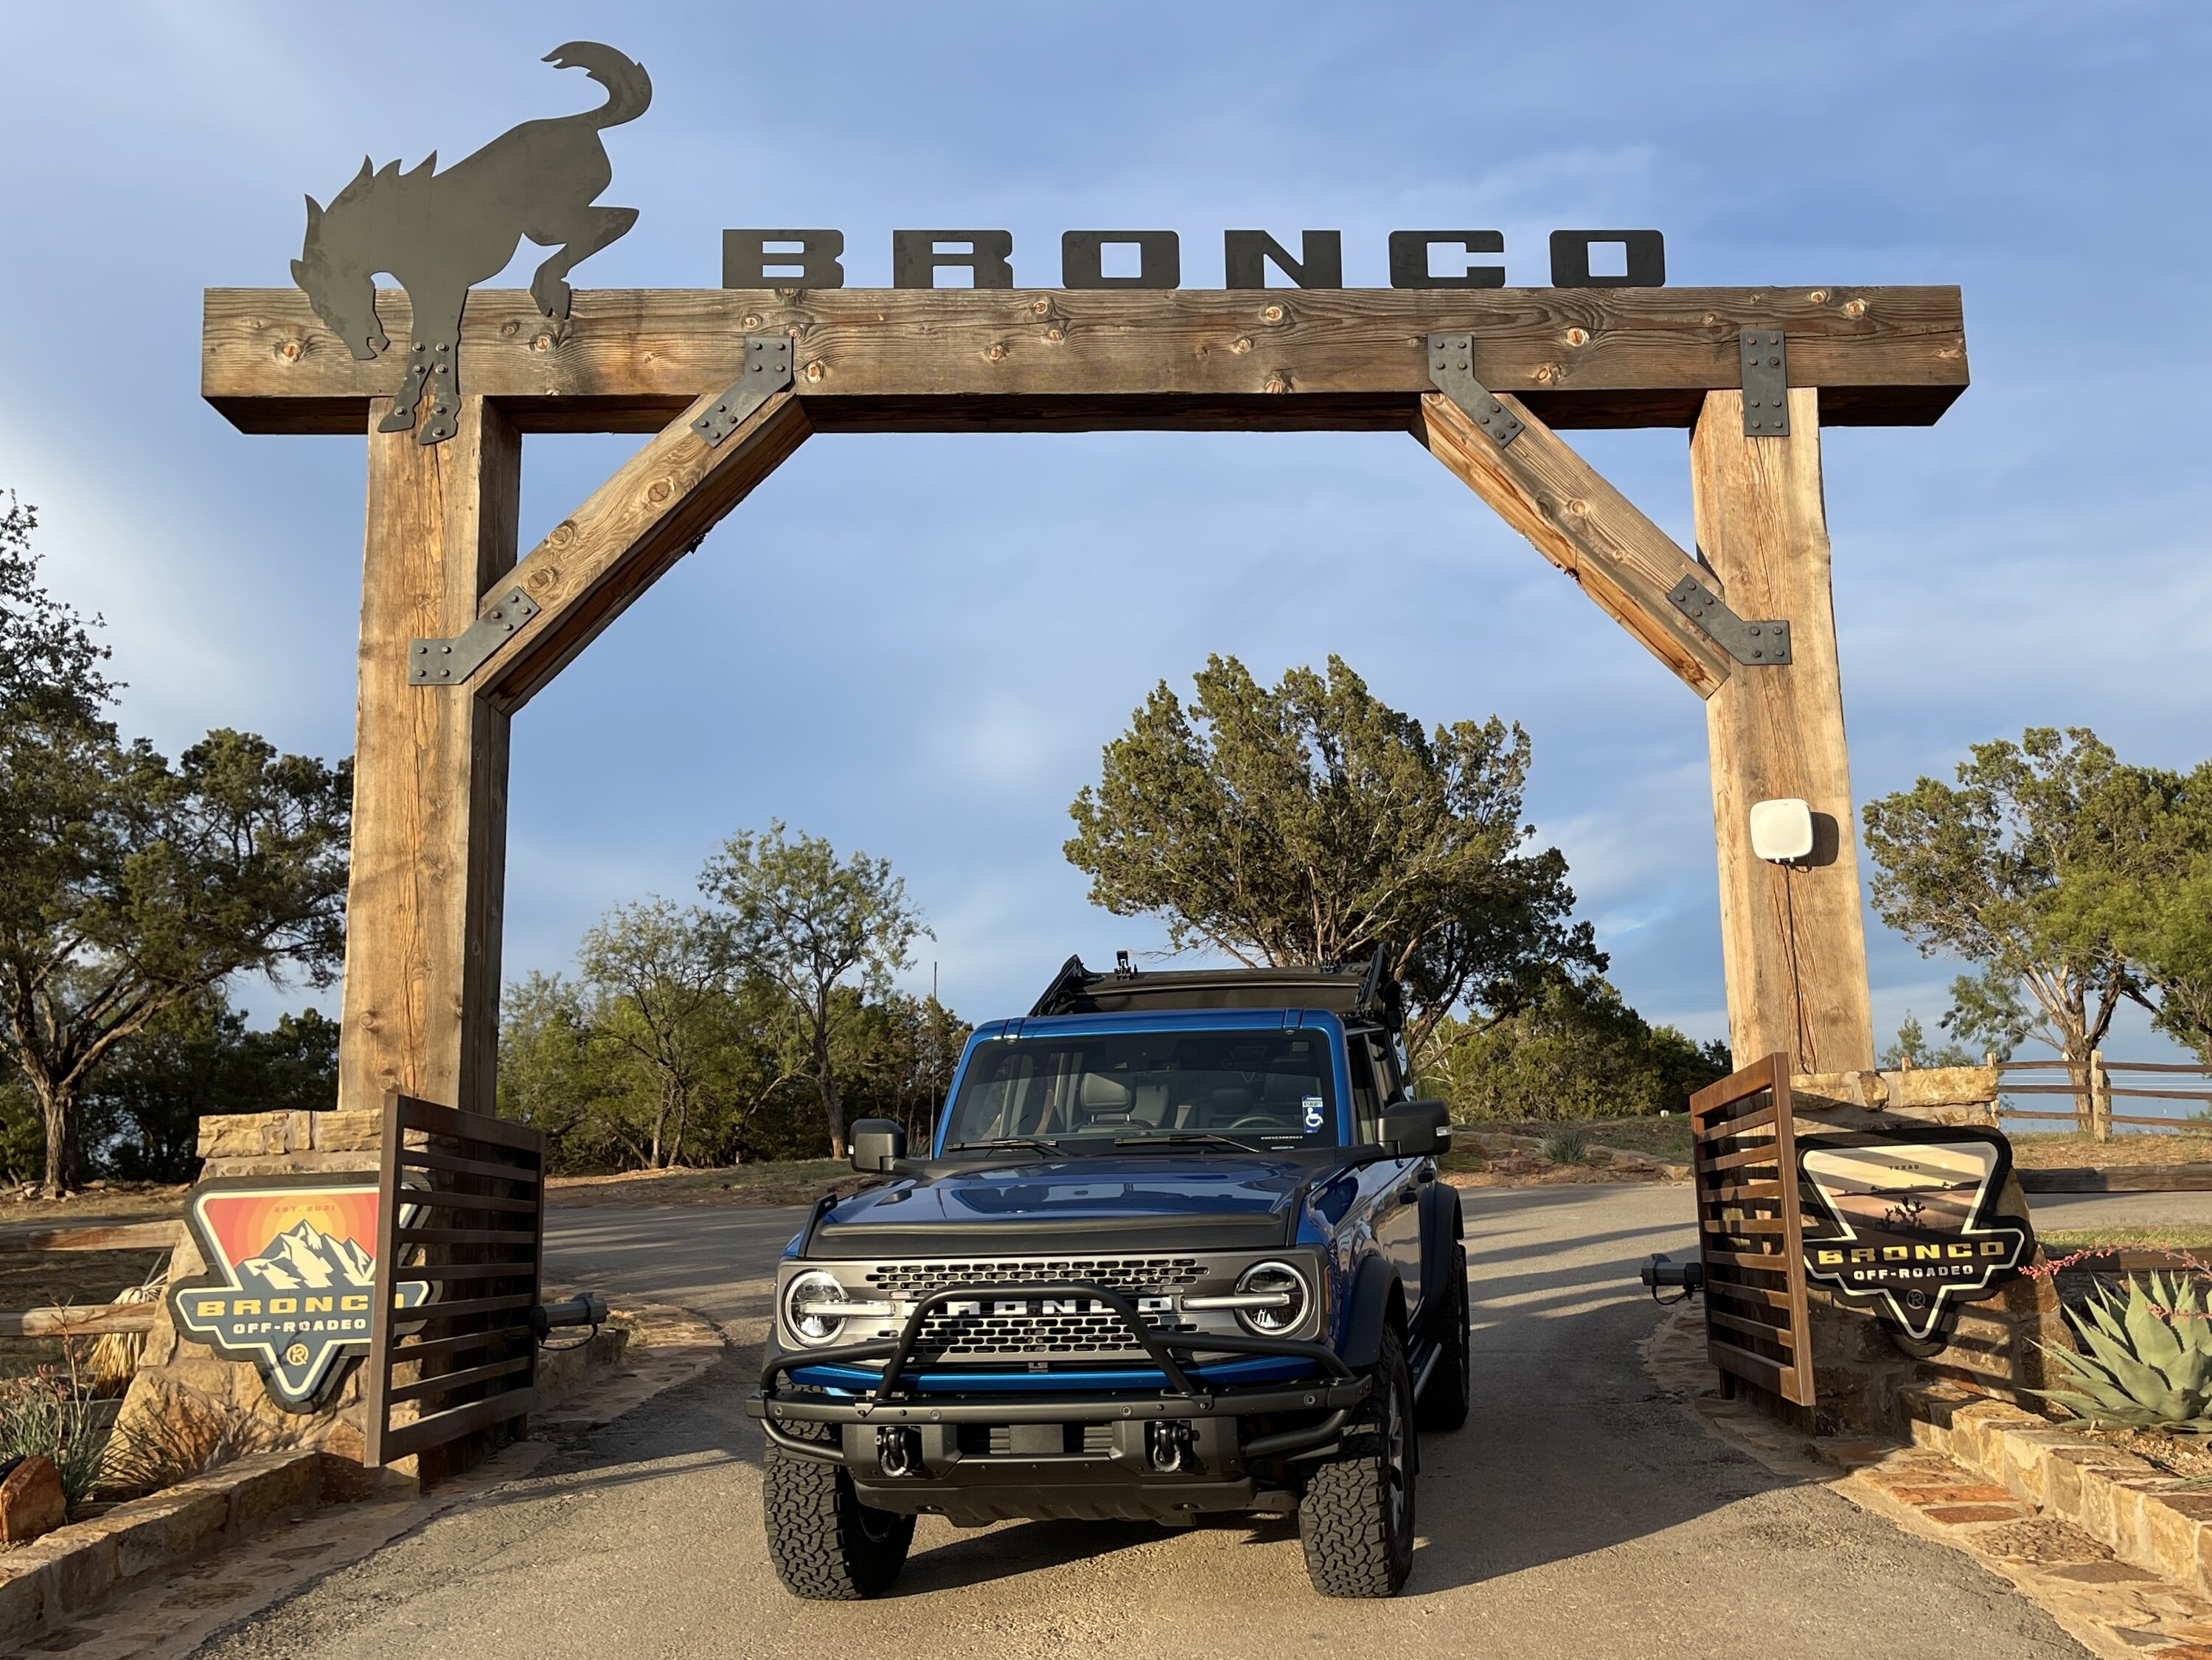 Ford Bronco Let's see your favorite Bronco picture of 2022 📸 E6FA6B4A-0B91-4662-8353-CFA2B80D118B_1_201_a